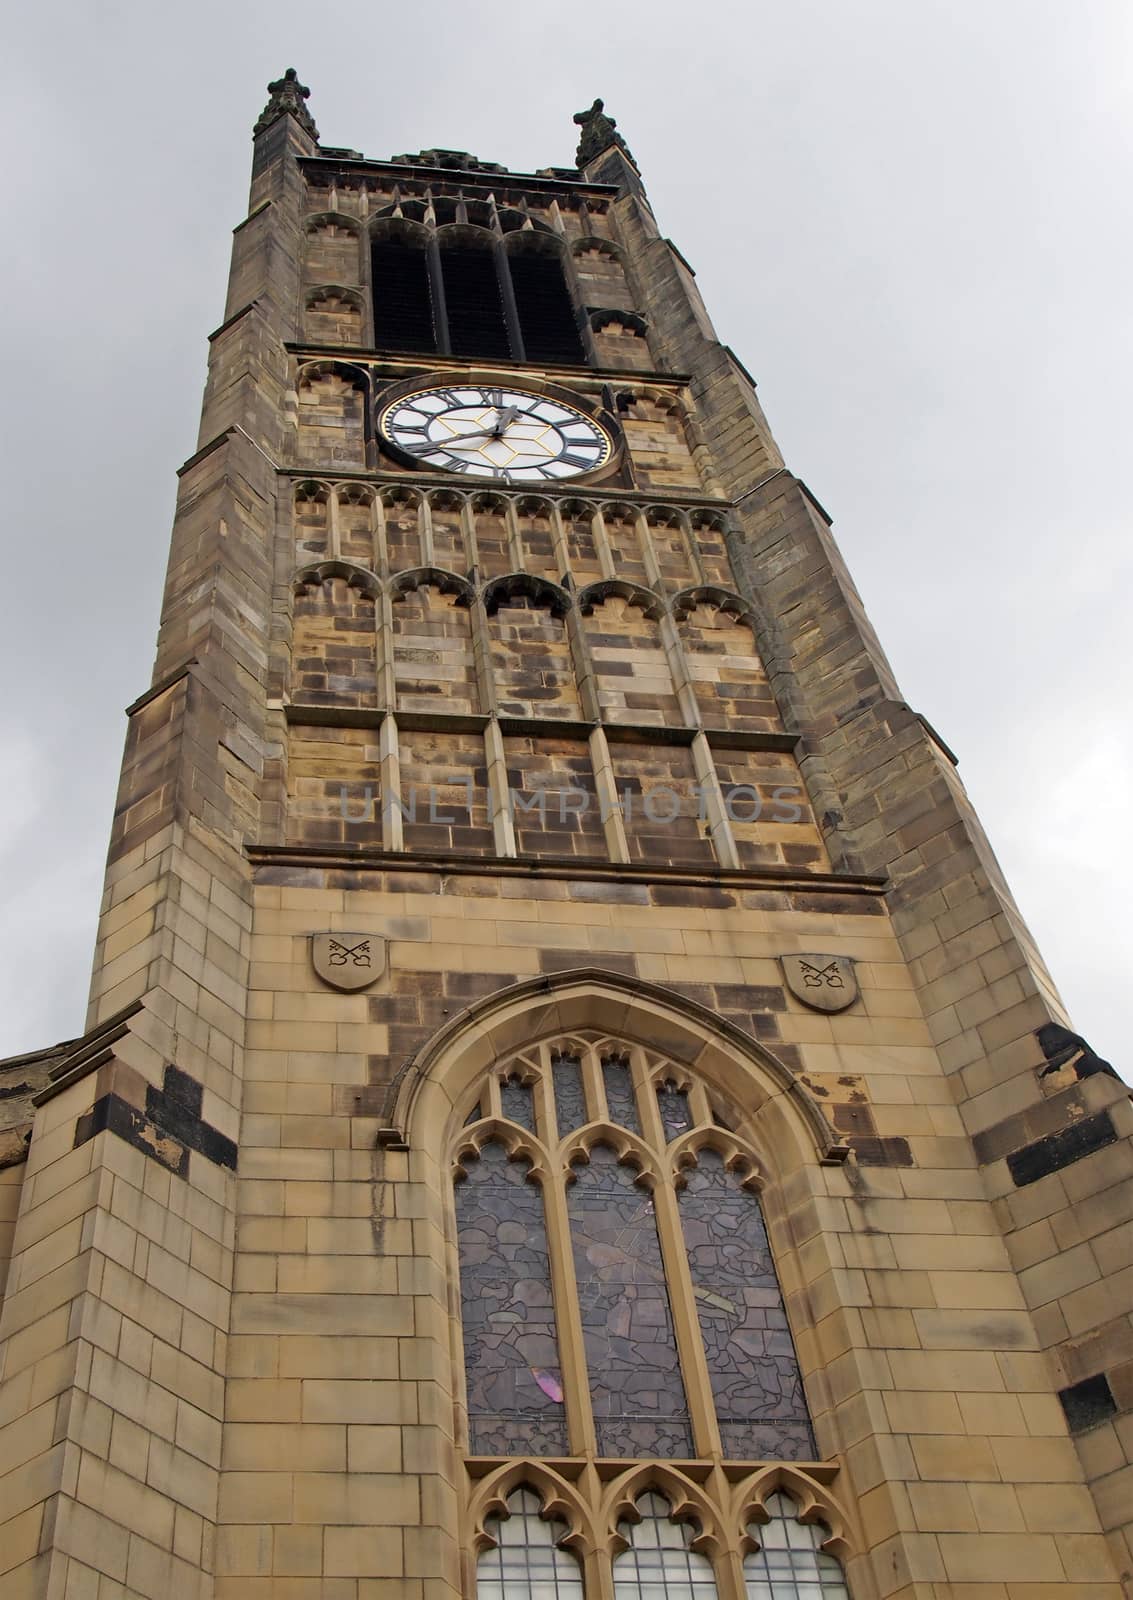 view of the clock tower and building of the historic saint peters parish church in the center of huddersfield against a cloudy sky by philopenshaw